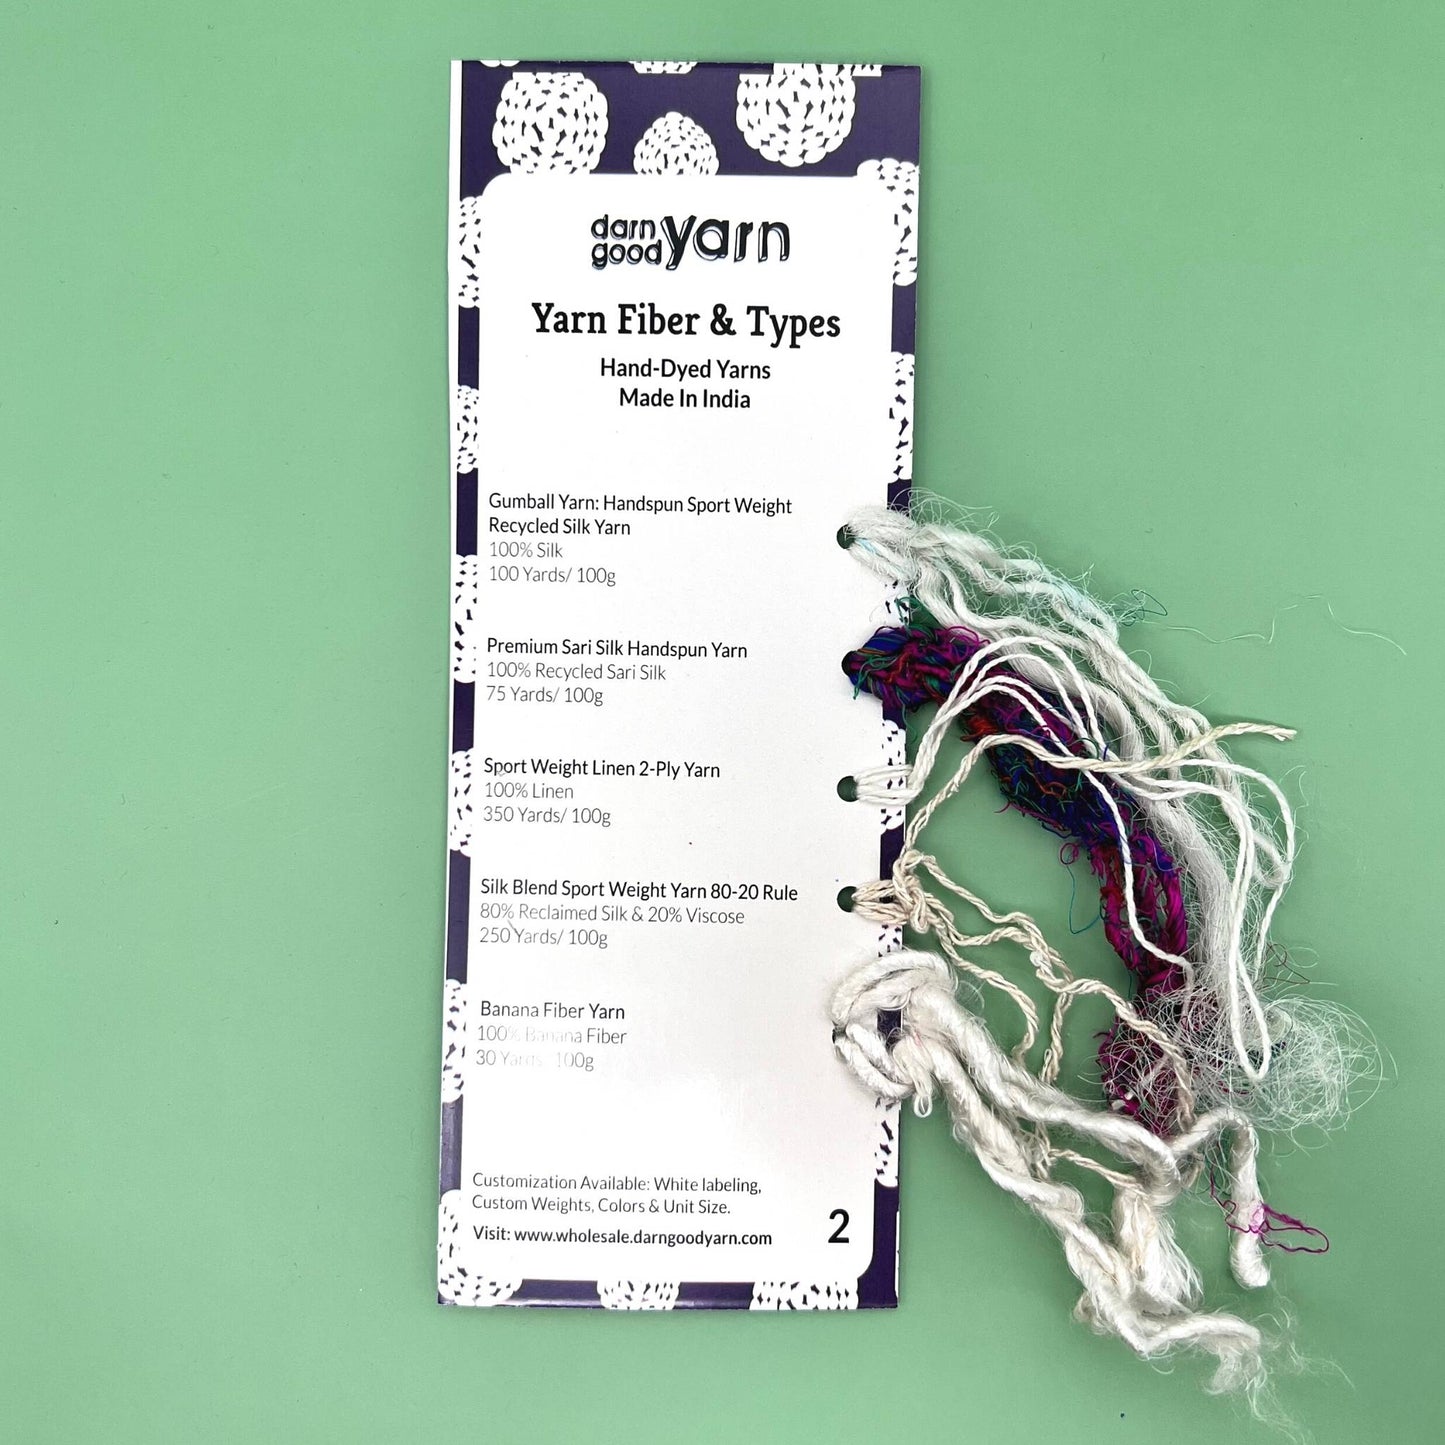 Yarn fiber and type sample cards on a green backdrop. 